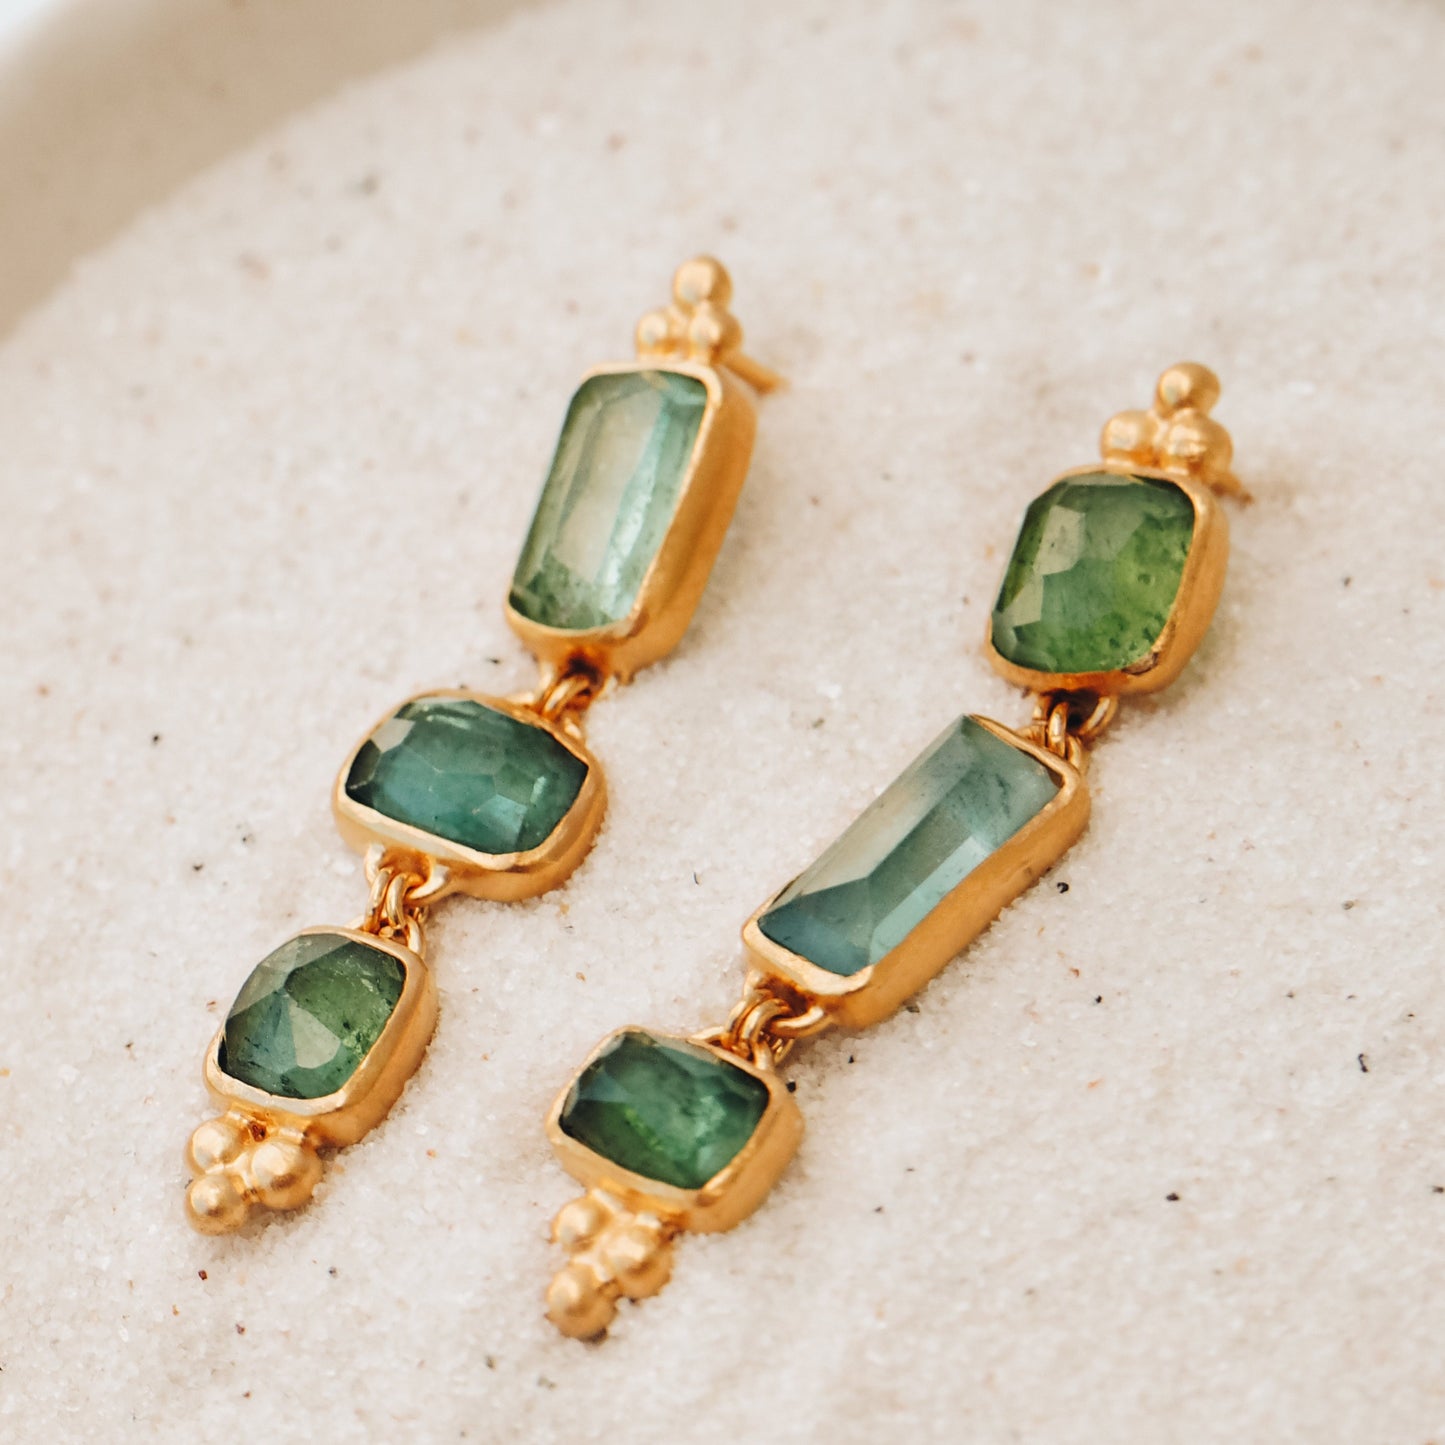 Dainty gold earrings featuring square rose cut tourmaline gemstone drops in ocean blue and green, adorned with exquisite granulation accents